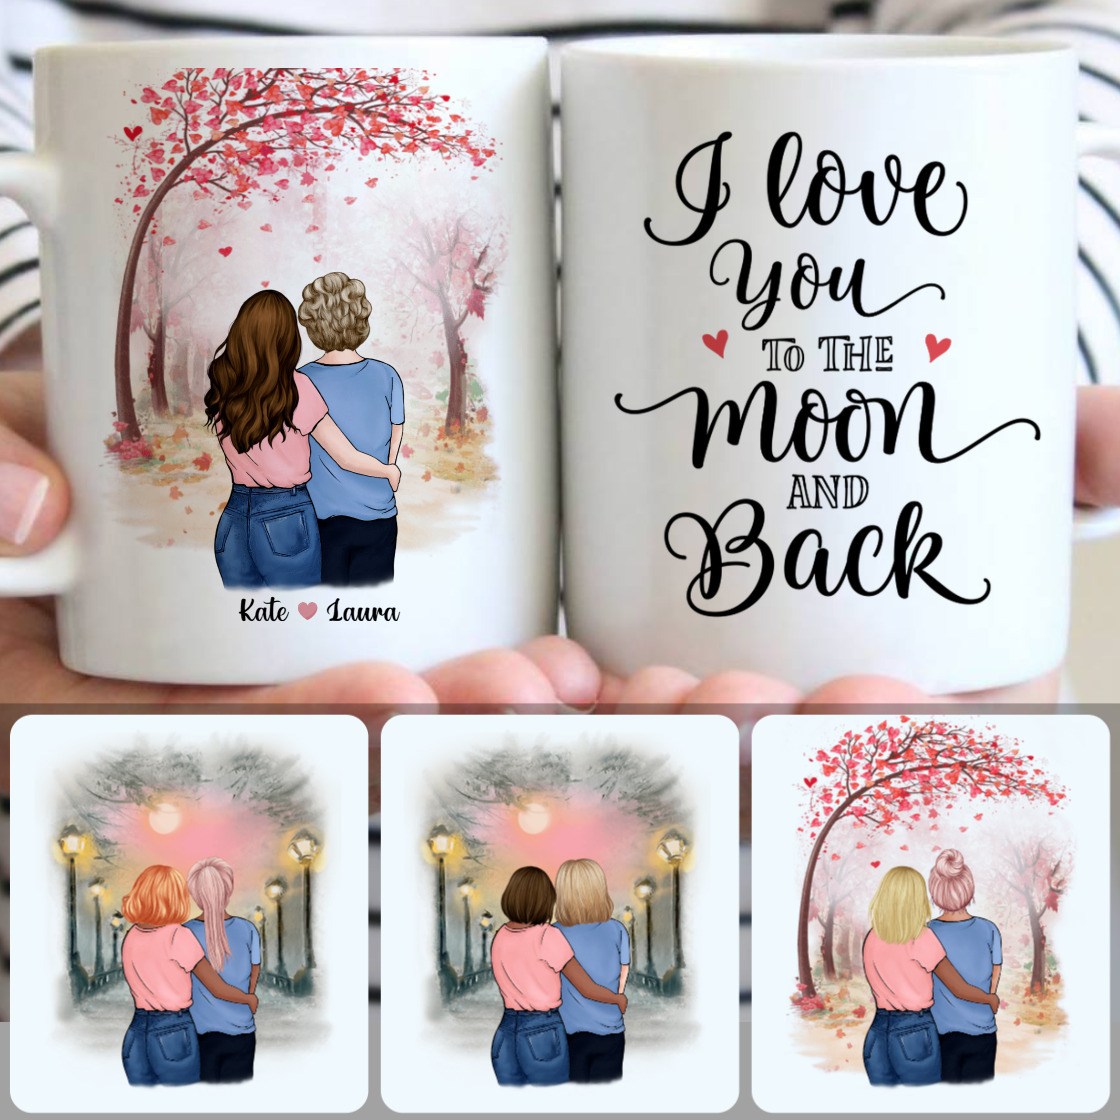 Personalized Mug, Meaningful Gifts For Stepmom, Mother & Daughter Customized Coffee Mug With Names